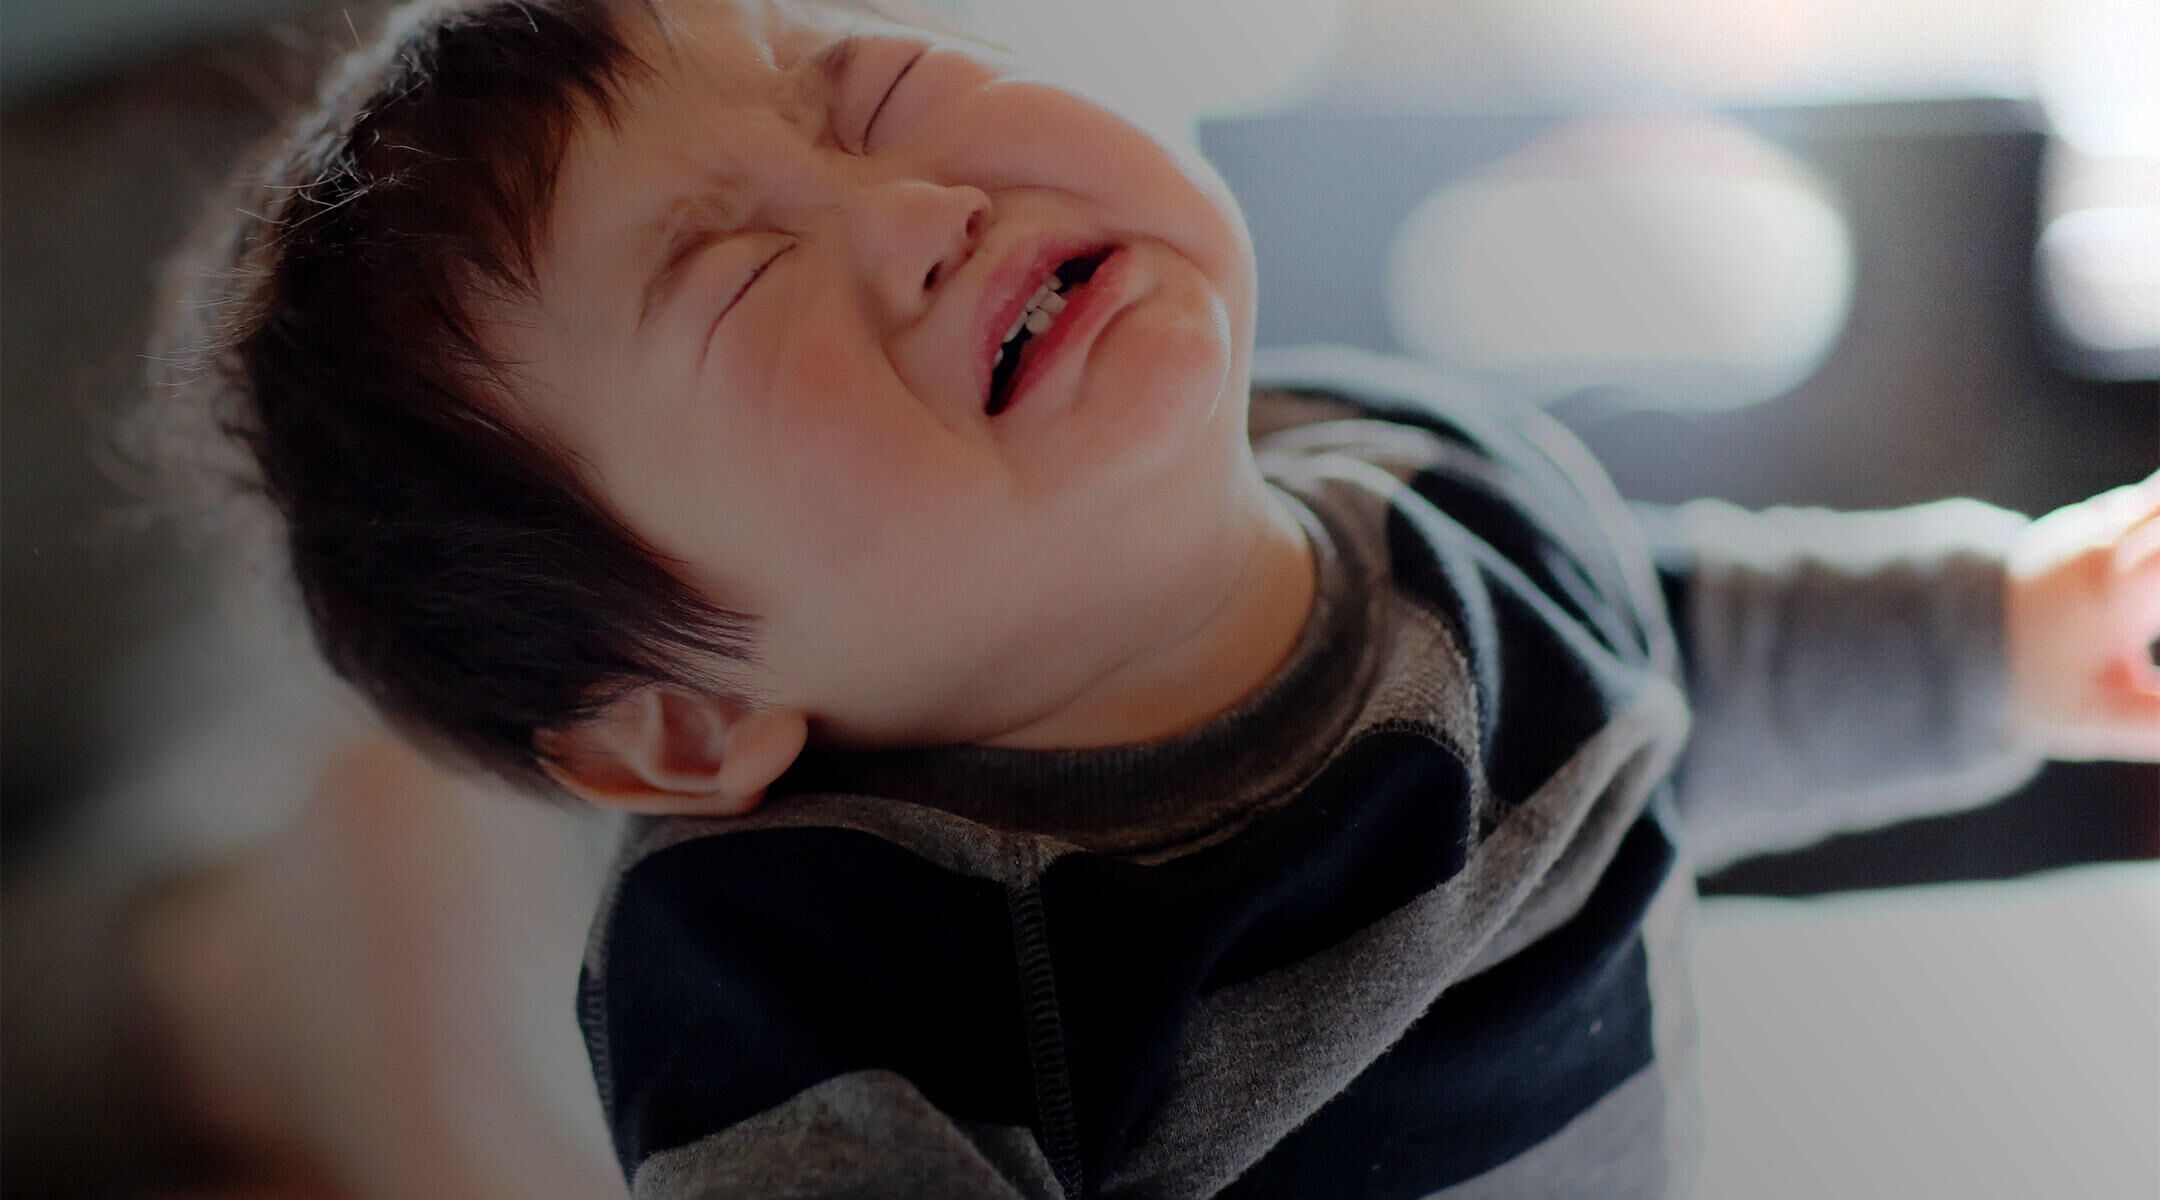 Tantrum How to Deal With Temper Tantrums